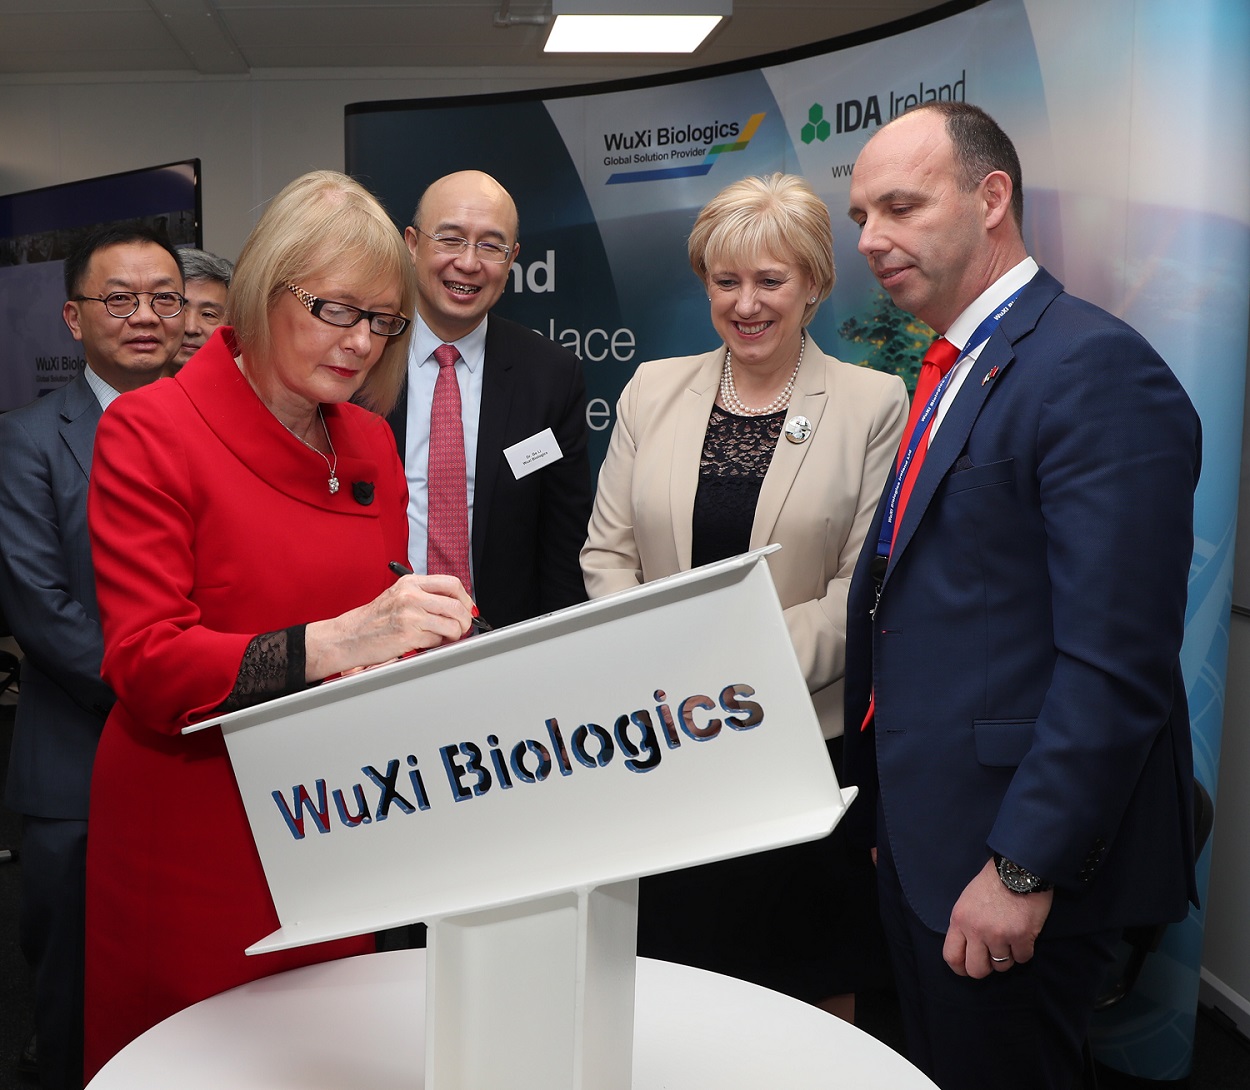 WuXi Vaccines investment to Bring 200 Jobs to Dundalk | IDA Ireland ...